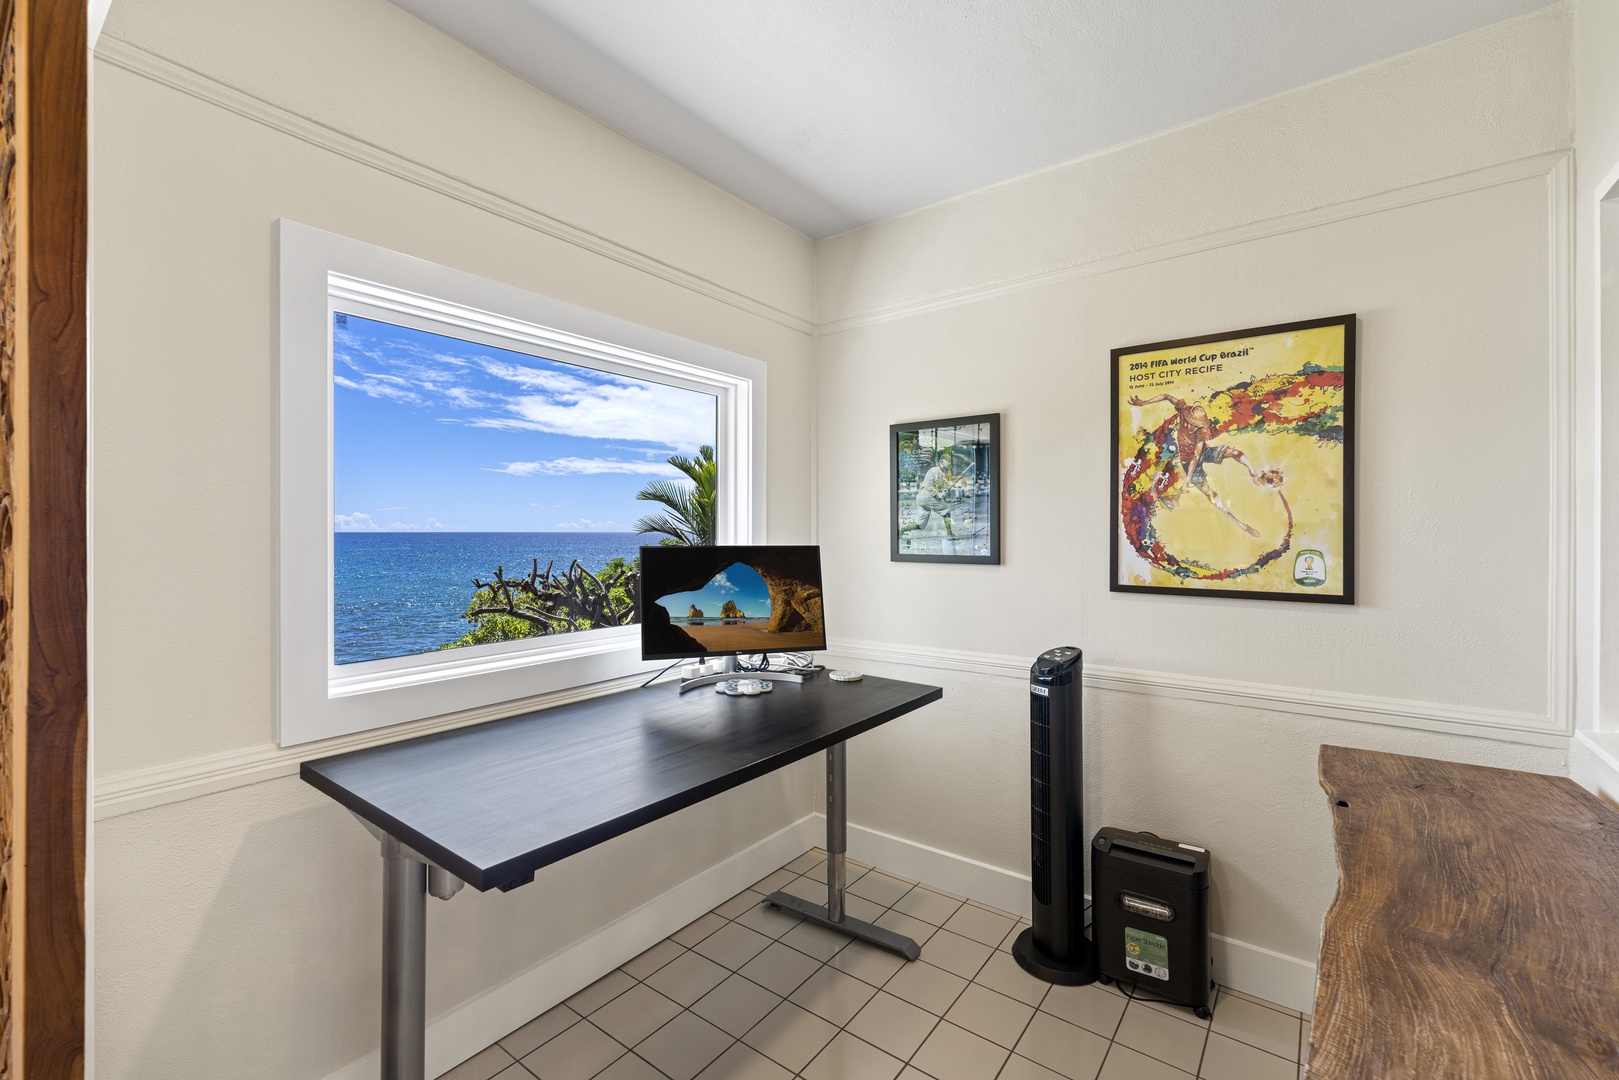 Kailua Kona Vacation Rentals, Ali'i Point #7 - Primary Bedroom desk area with a great Ocean View